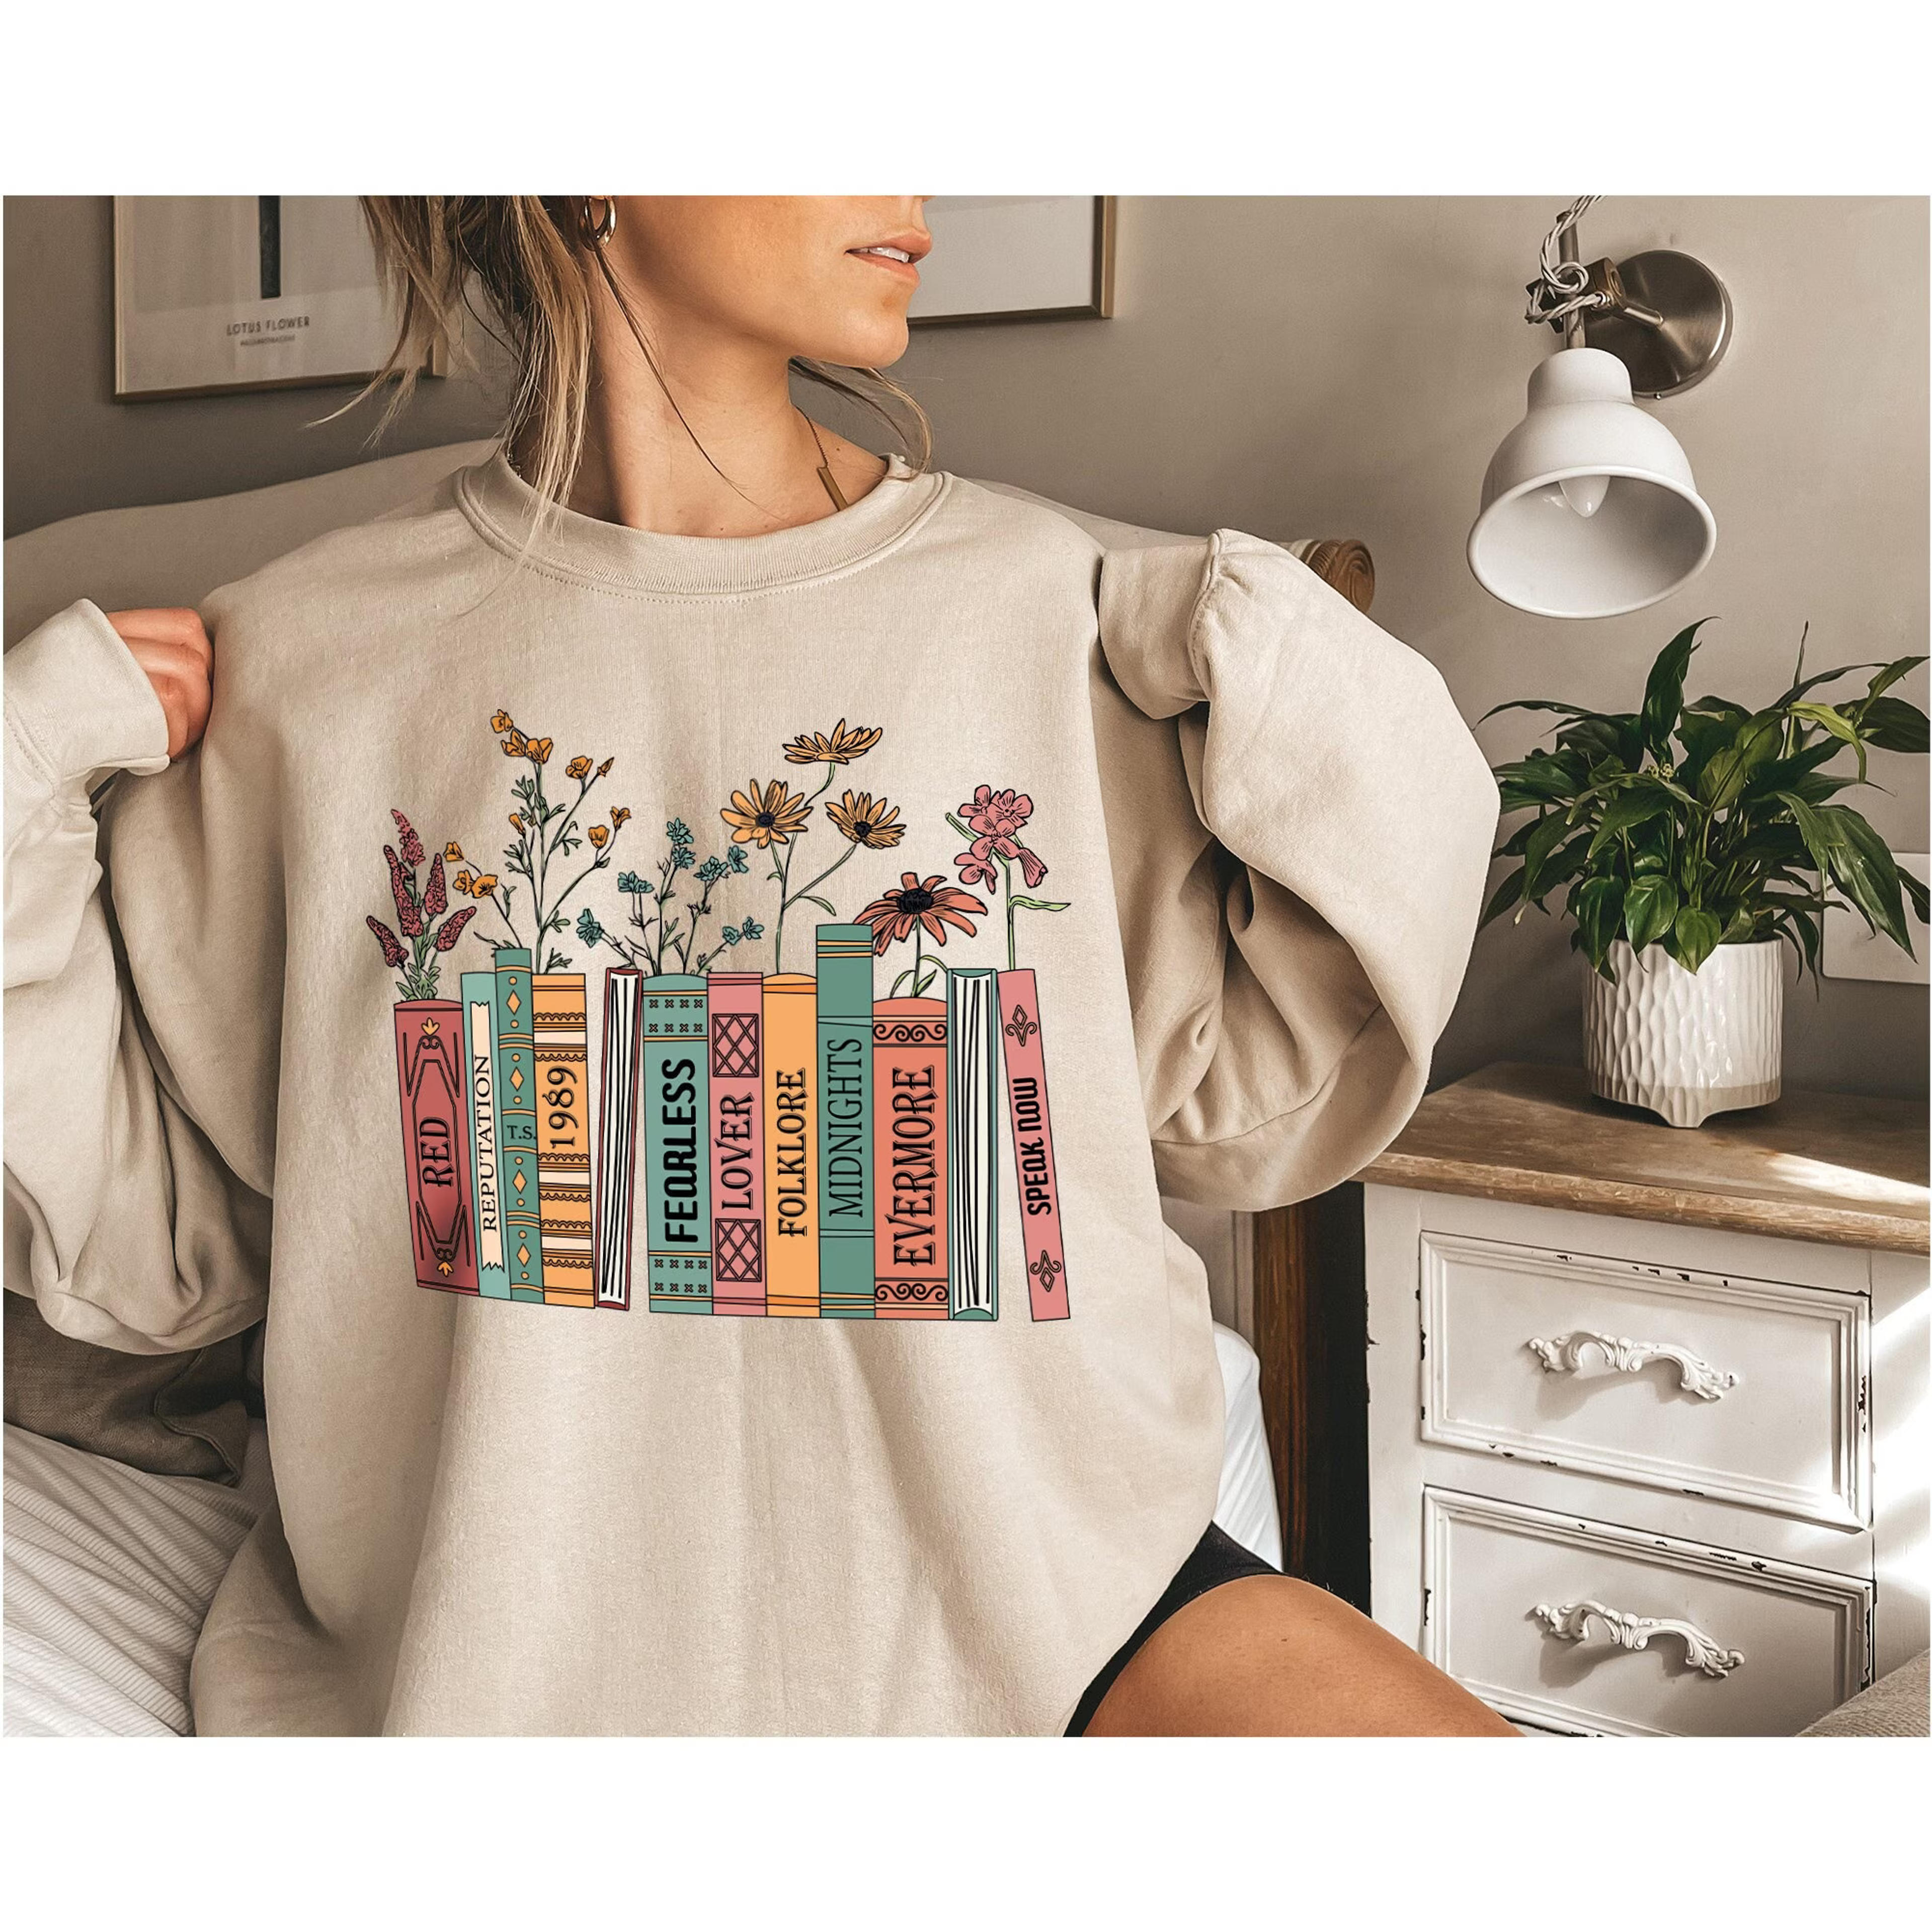 Albums as Books Sweatshirt Trendy Aesthetic for Book Lovers